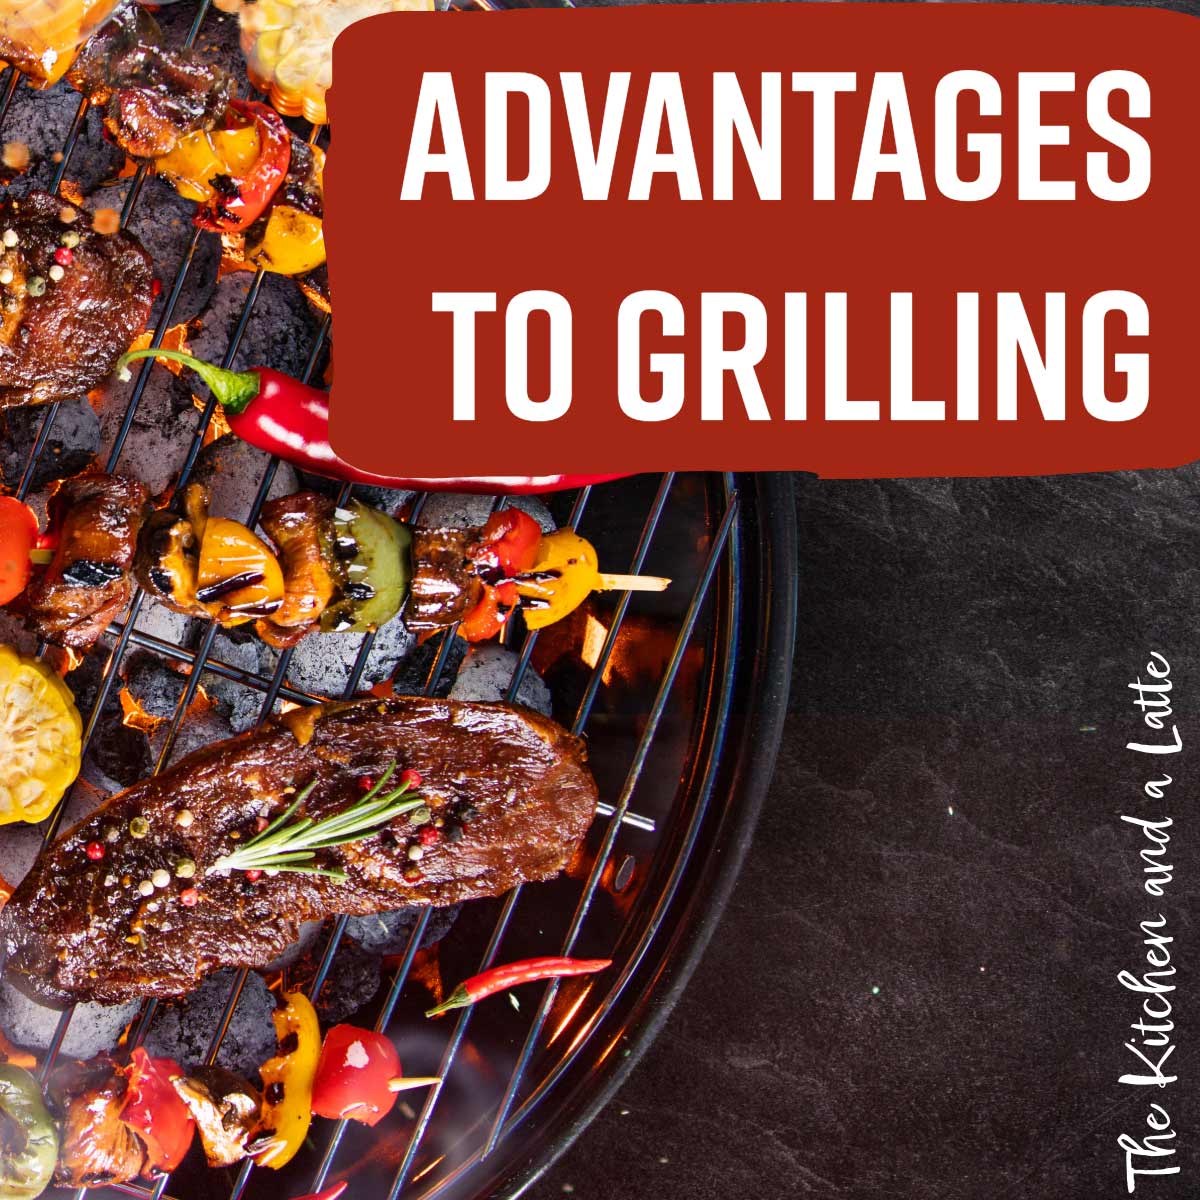 Advantages to grilling. Kebabs and steaks cooking on a charcoal grill.